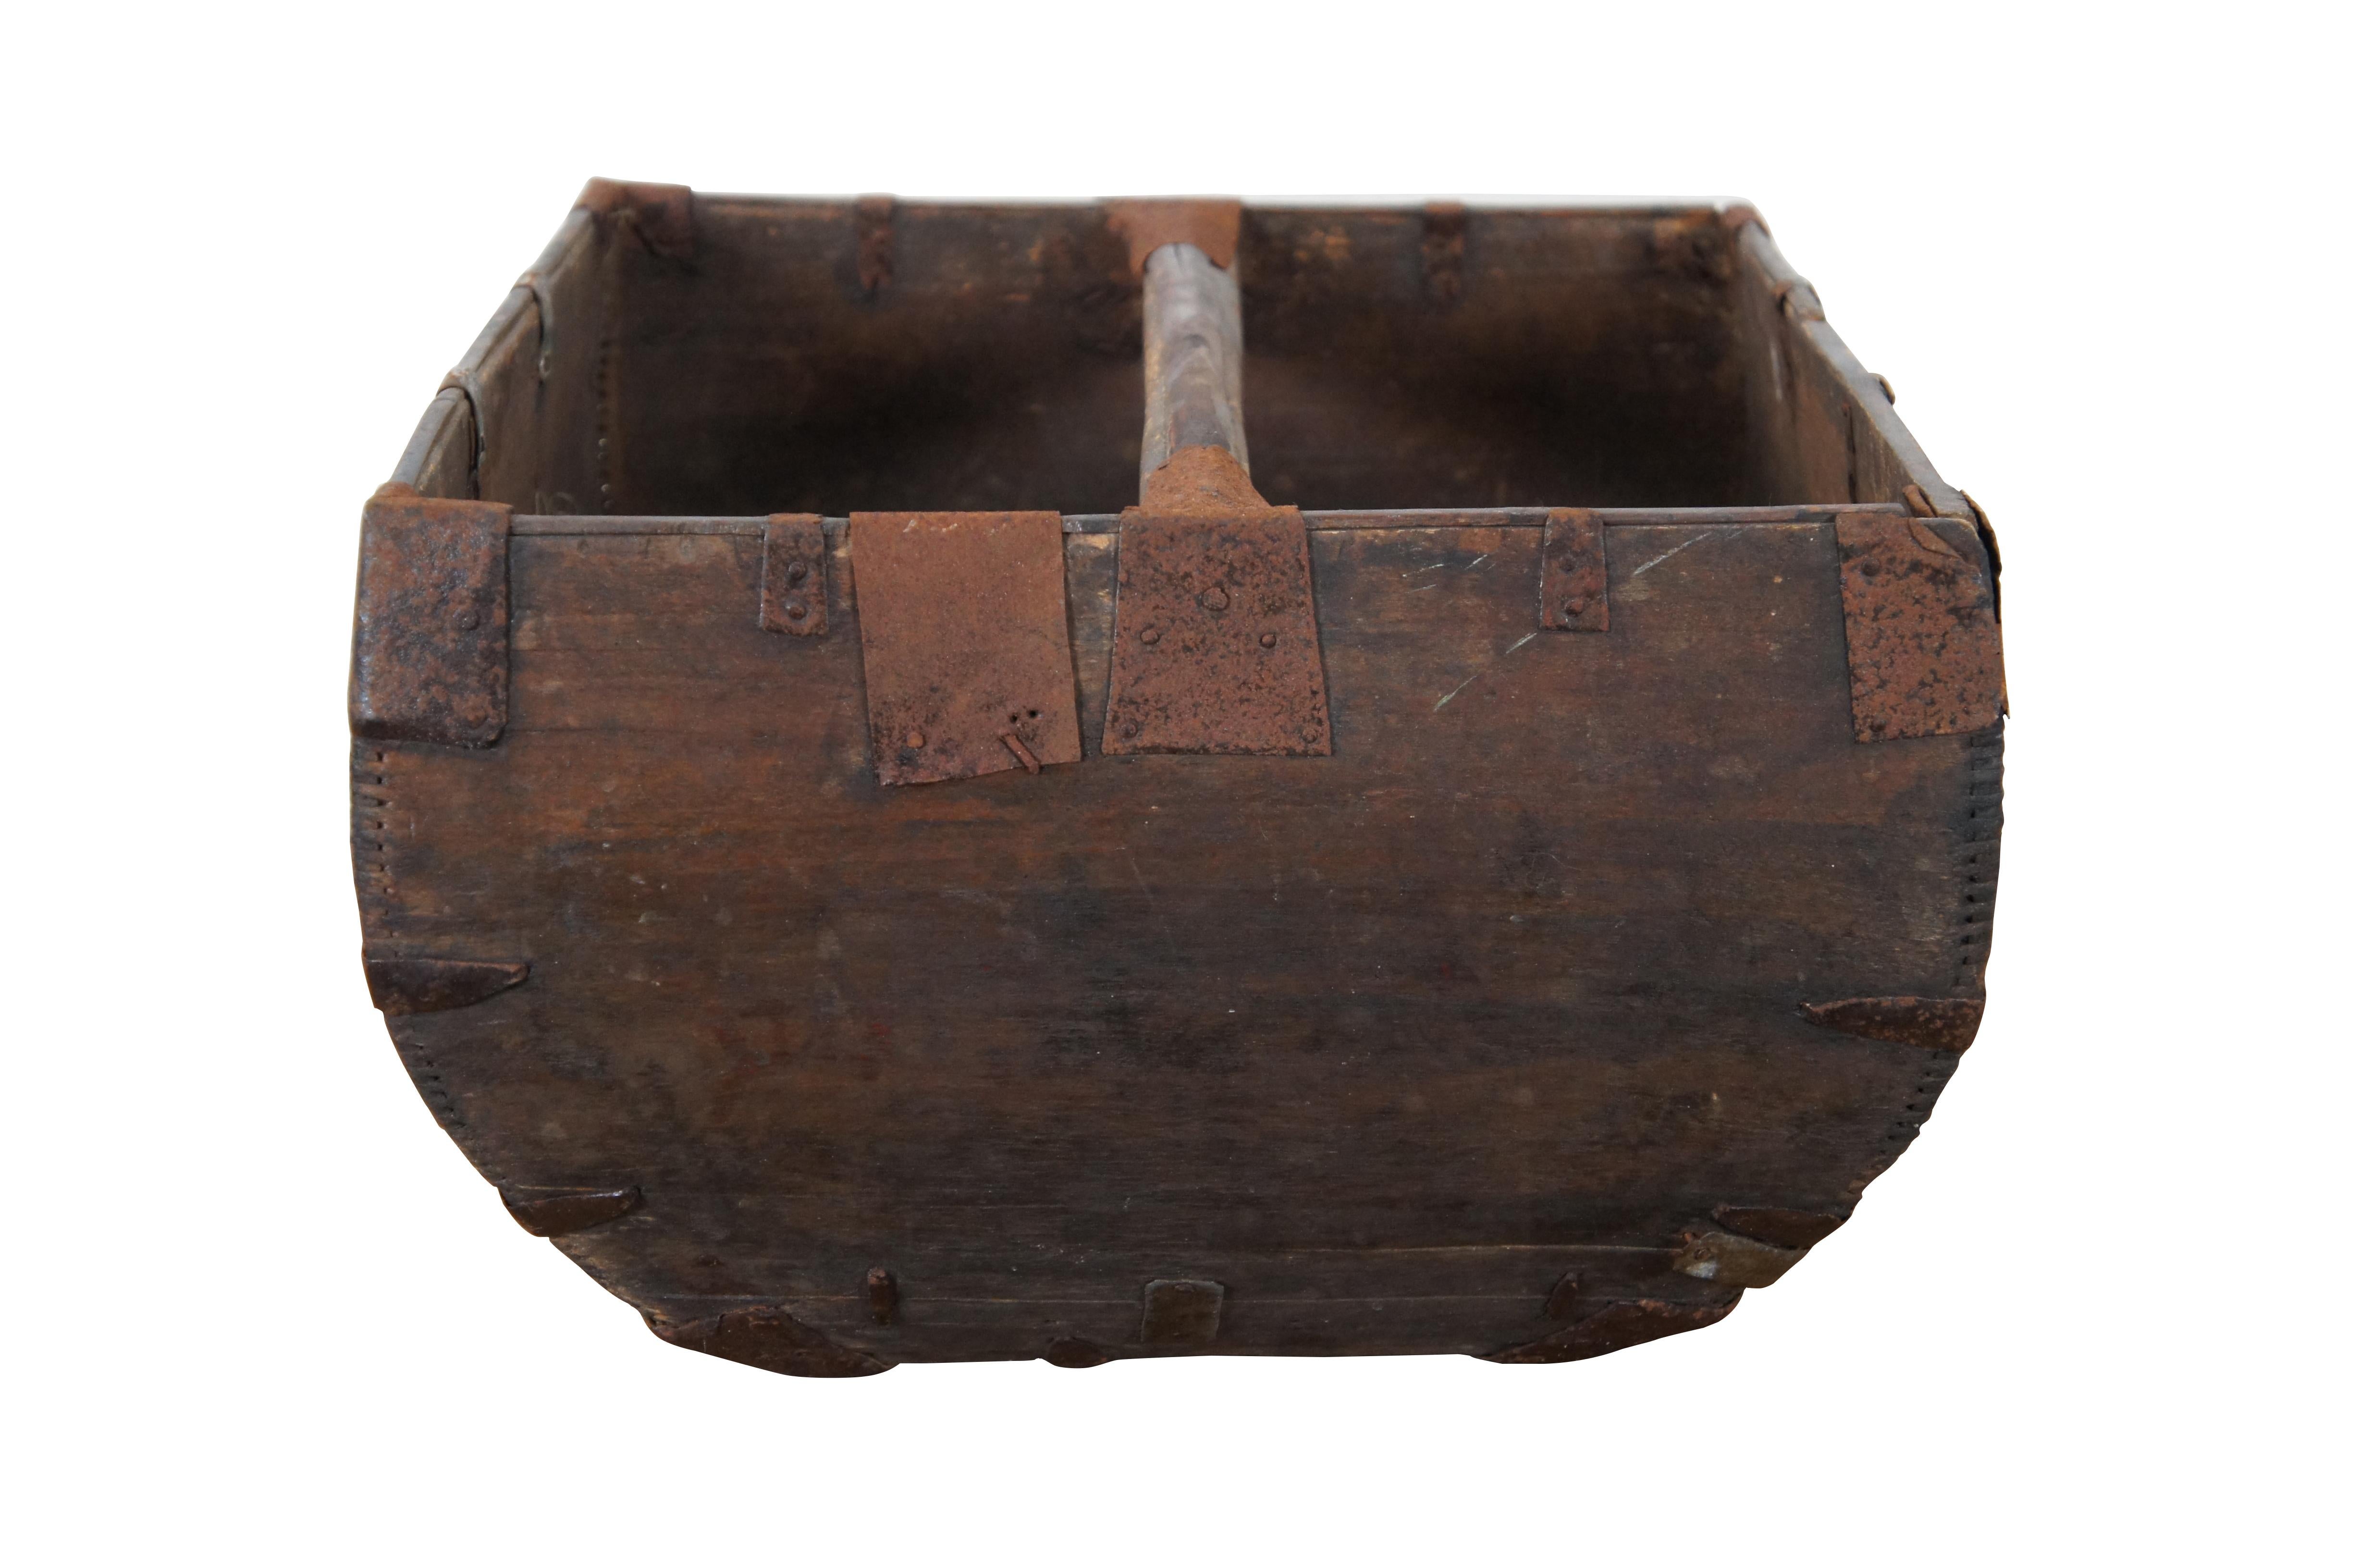 Antique wood and iron Chinese rice / grain harvesting basket / bucket with fixed center handle. Size: 14